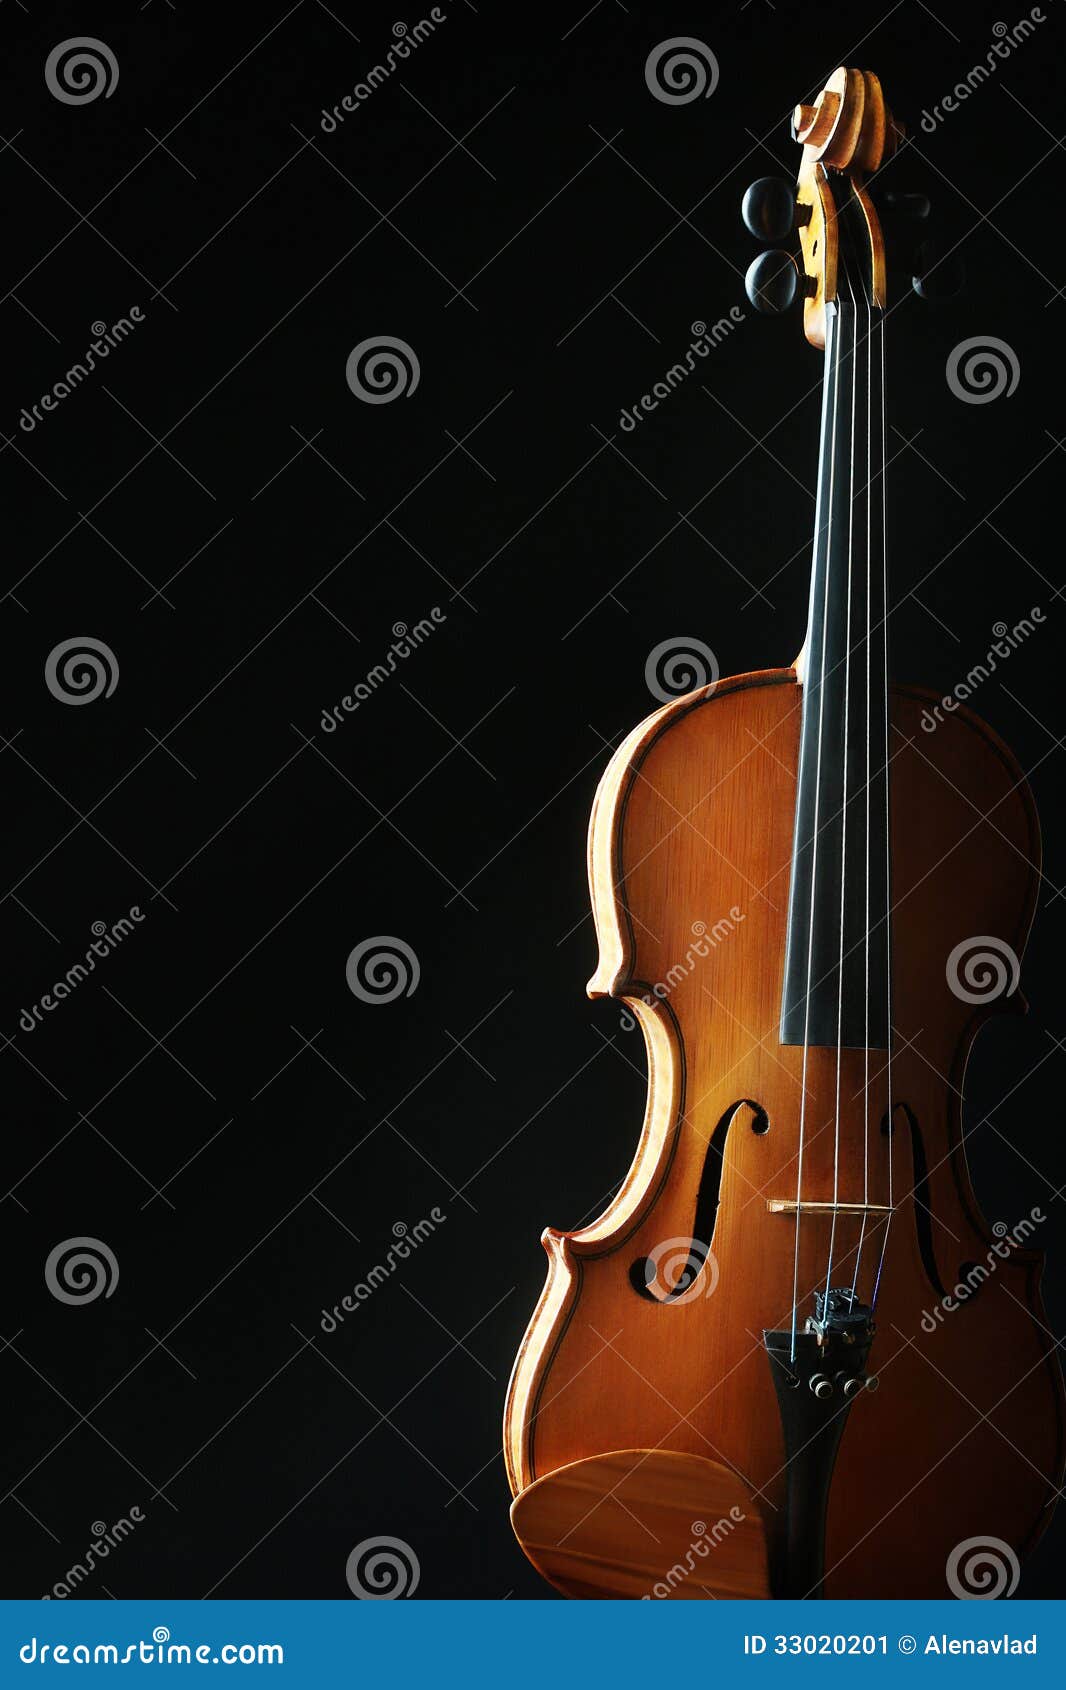 classical music instruments violin